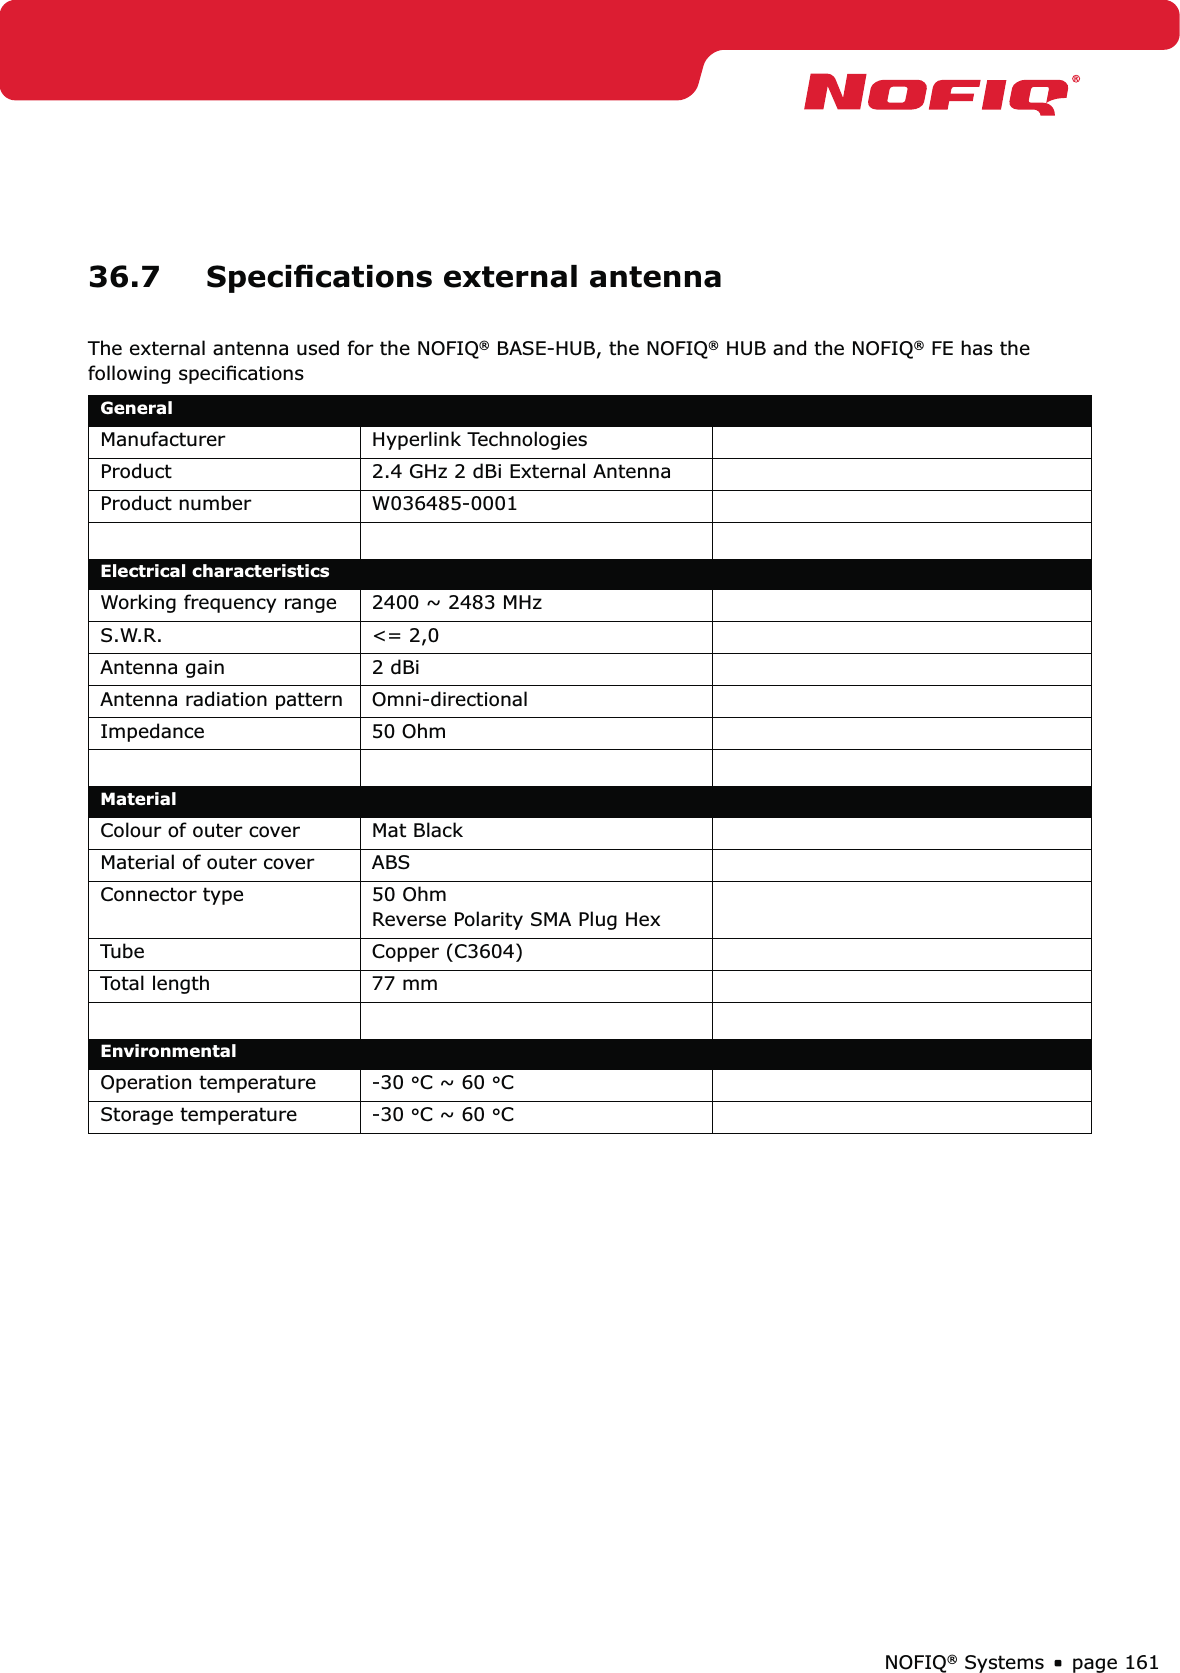 page 161NOFIQ® Systems36.7  Speciﬁcations external antennaThe external antenna used for the NOFIQ® BASE-HUB, the NOFIQ® HUB and the NOFIQ® FE has the following speciﬁcationsGeneral                                                                    Manufacturer Hyperlink Technologies                                                                  Product 2.4  GHz  2  dBi  External  Antenna            Product number W036485-0001                      Electrical characteristicsWorking frequency range 2400 ~ 2483 MHz                       S.W.R. &lt;= 2,0                                       Antenna gain 2 dBi                              Antenna radiation pattern Omni-directional                         Impedance 50 Ohm                                      MaterialColour of outer cover Mat Black                                           Material of outer cover ABS                                            Connector type 50 Ohm                                      Reverse Polarity SMA Plug Hex    Tube Copper (C3604)                            Total length  77 mm                                       EnvironmentalOperation temperature -30 °C ~ 60 °C                              Storage temperature -30 °C ~ 60 °C                              